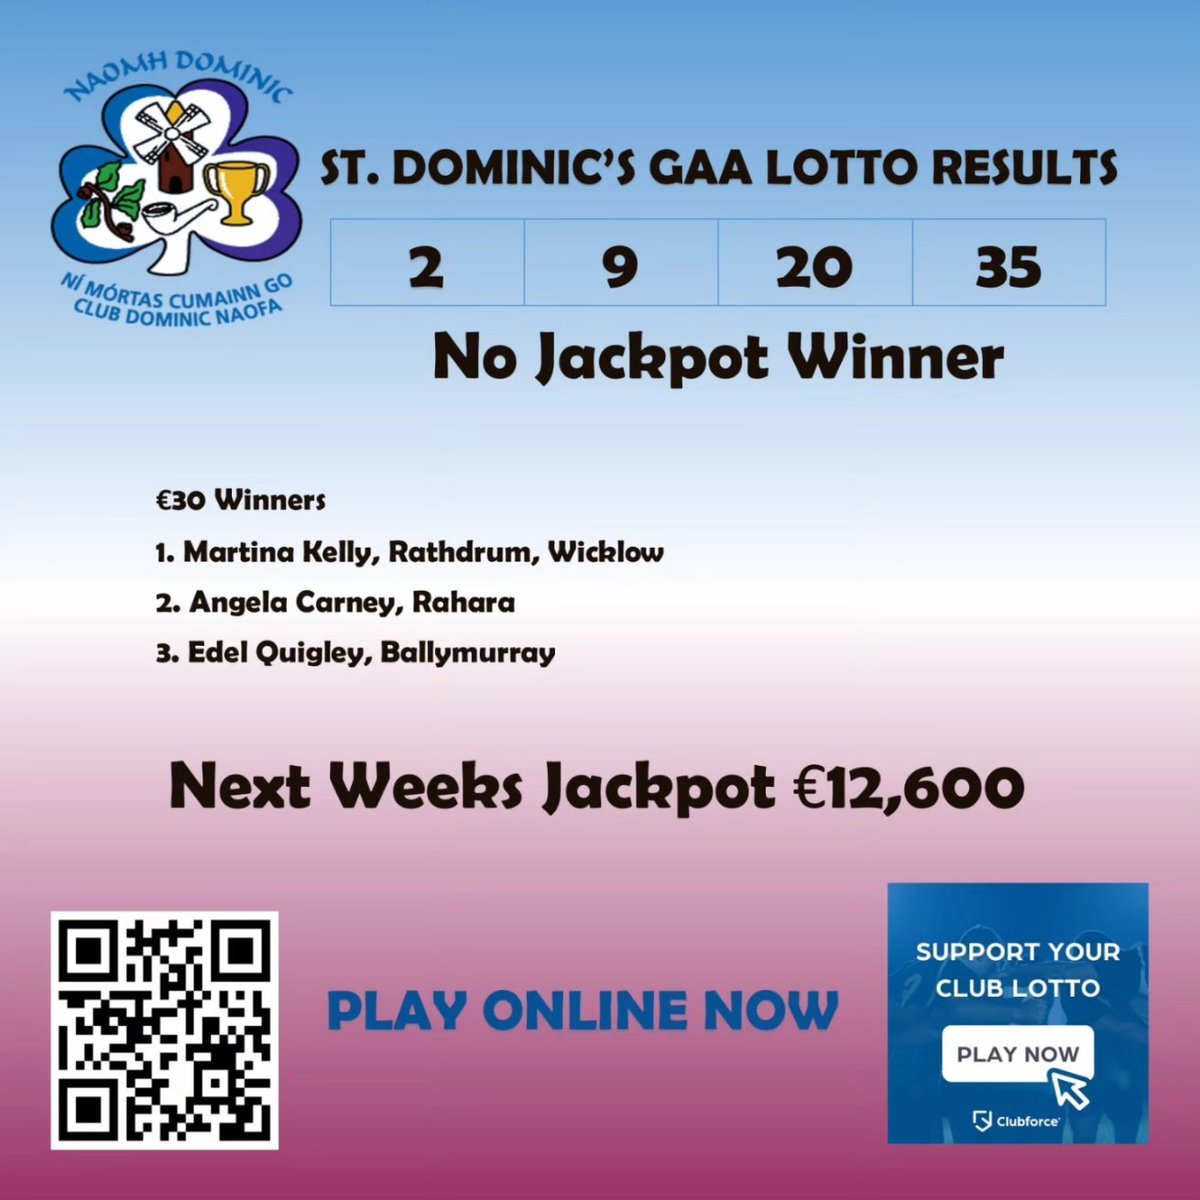 Happy Easter .... Win big as our jackpot rises!!! Congratulations to last weeks lucky dip winners! PLAY ONLINE NOW bit.ly/3JTAYN6 Please support our club by supporting our lotto!!! Please message if you have any issues signing up!